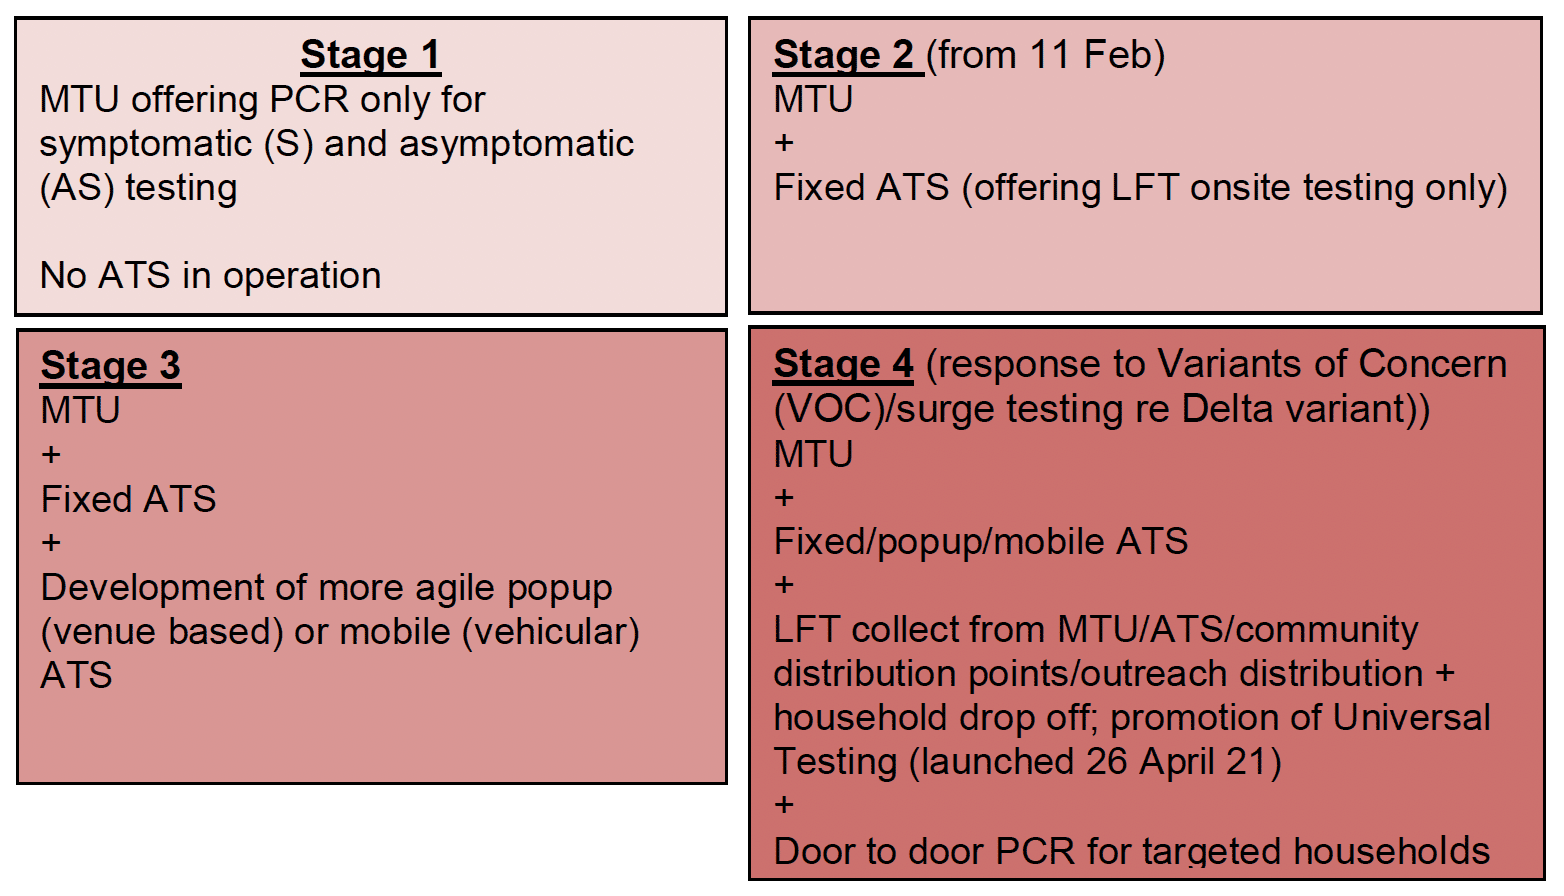 Figure 5: Evolution stages of targeted community testing 18/01 to 31/05 2021